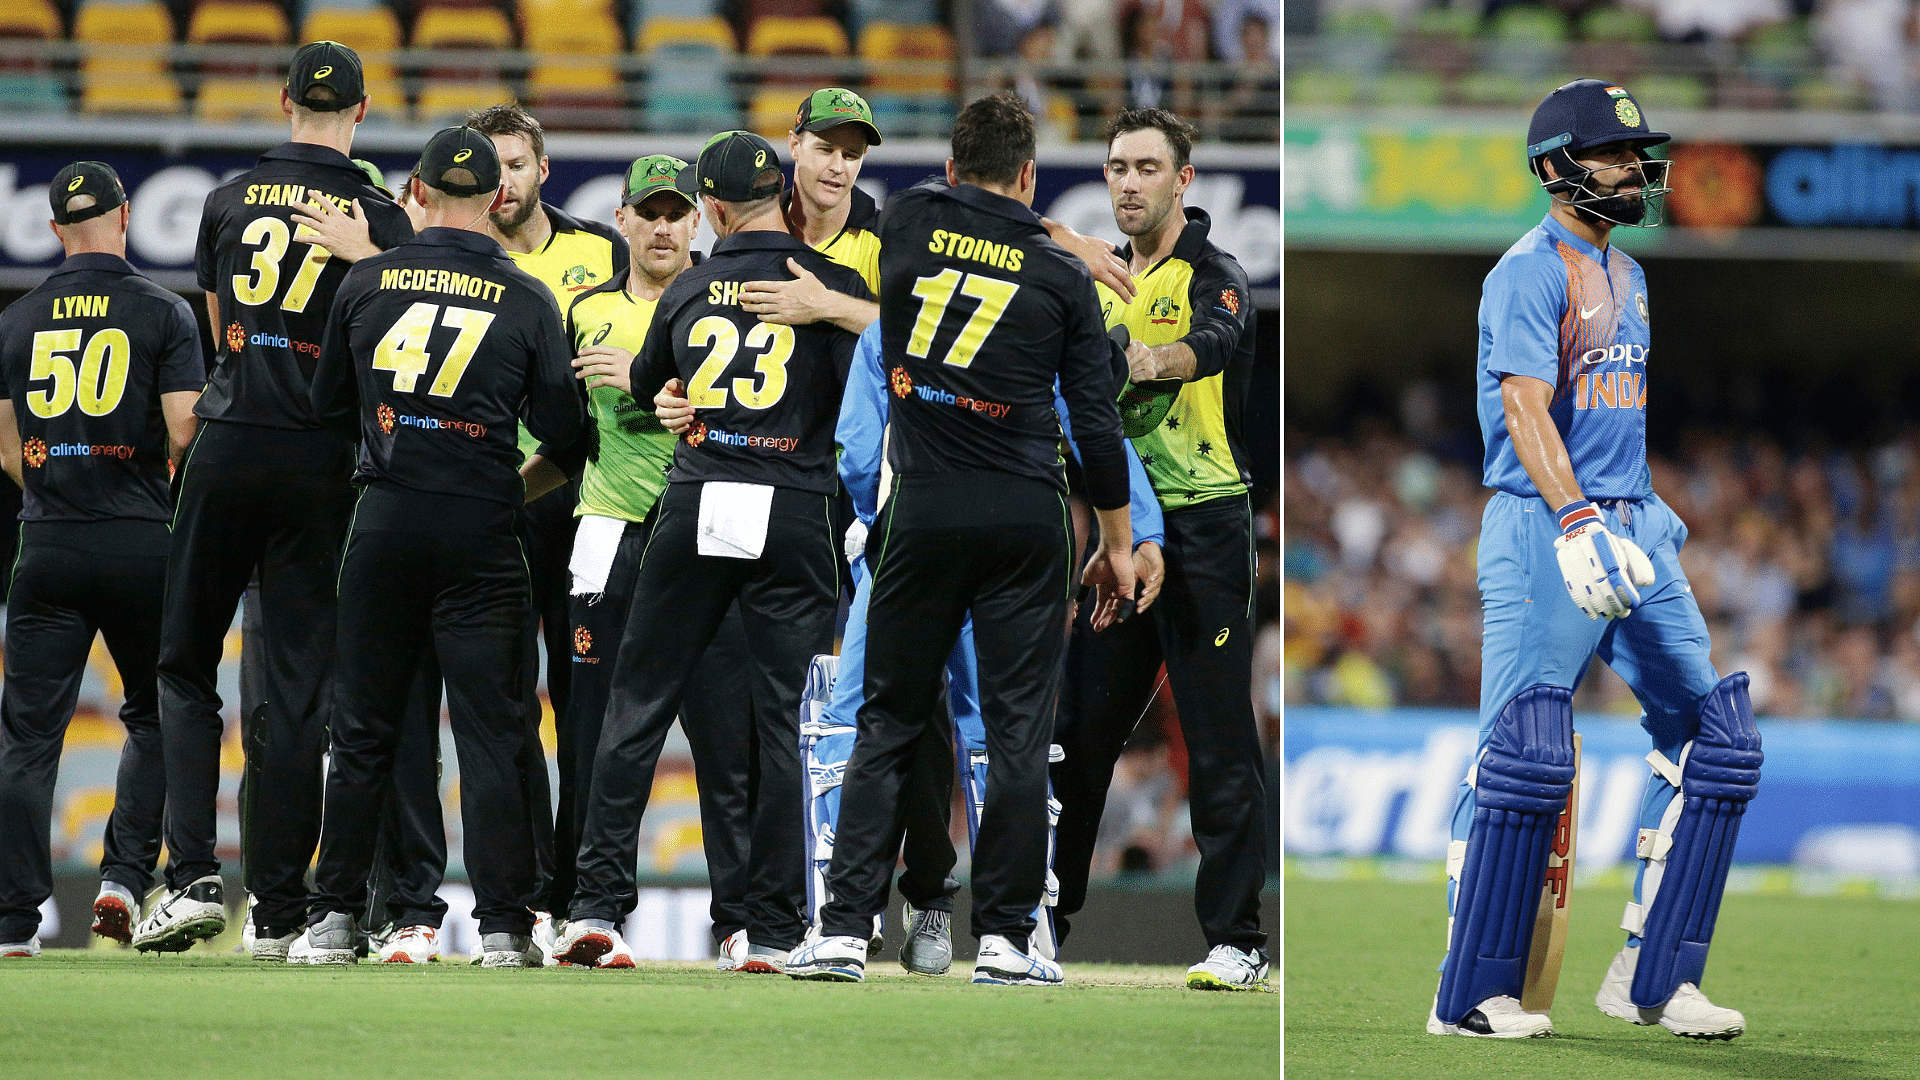 India began their tour of Australia with a 4-run defeat (DLS) in the 1st T20I at Brisbane